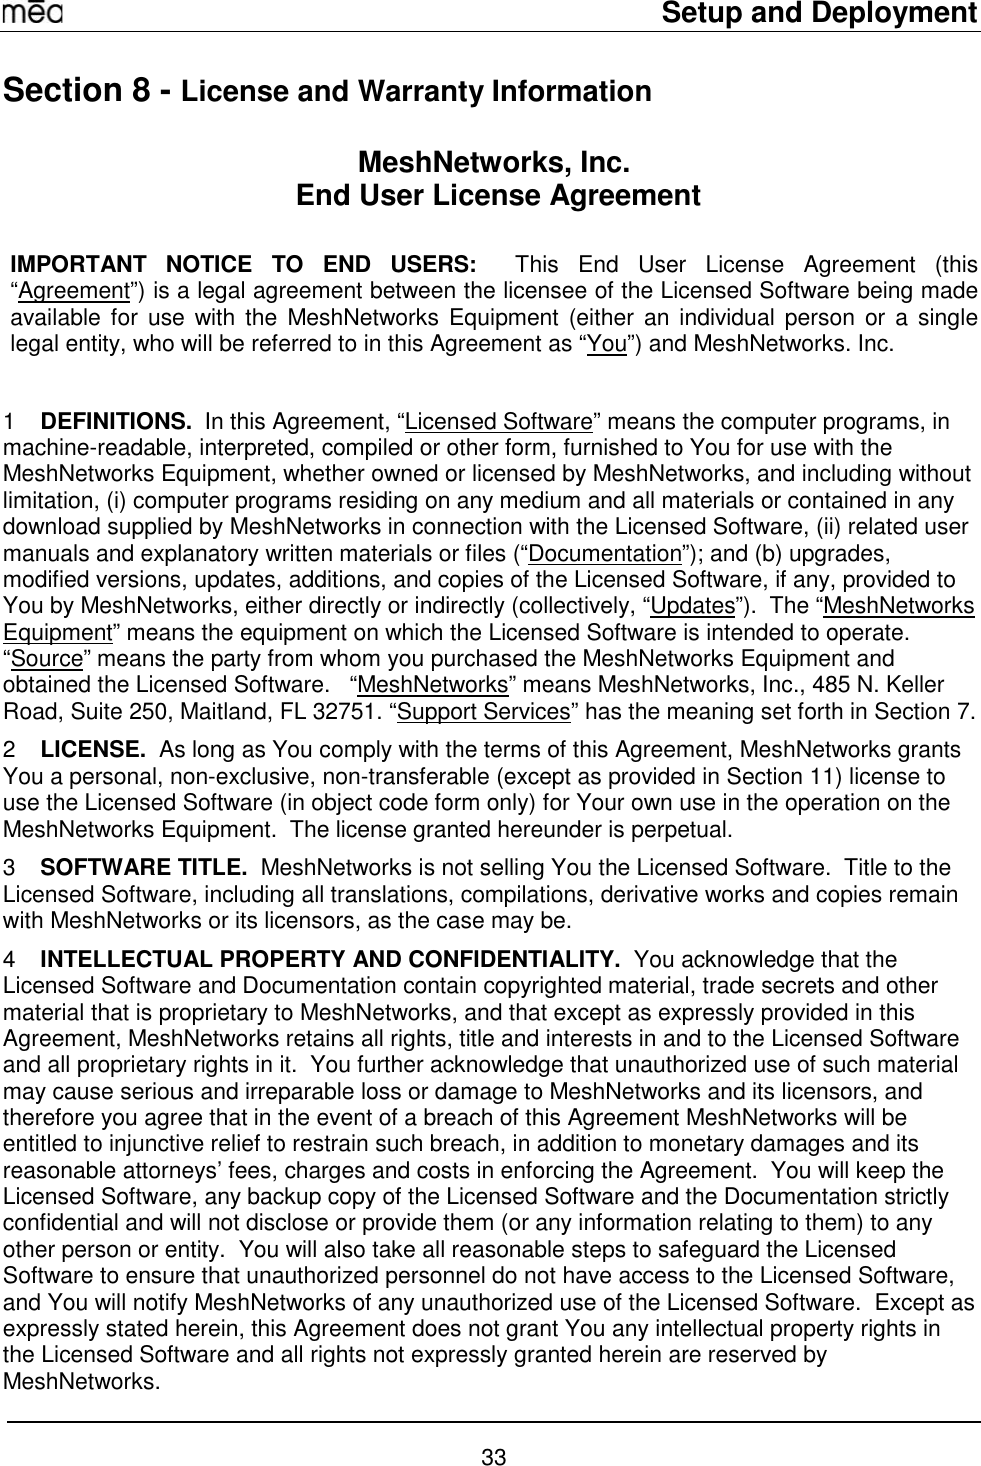     Setup and Deployment  33 Section 8 - License and Warranty Information MeshNetworks, Inc.  End User License Agreement  IMPORTANT NOTICE TO END USERS:  This End User License Agreement (this “Agreement”) is a legal agreement between the licensee of the Licensed Software being made available for use with the MeshNetworks Equipment (either an individual person or a single legal entity, who will be referred to in this Agreement as “You”) and MeshNetworks. Inc.    1  DEFINITIONS.  In this Agreement, “Licensed Software” means the computer programs, in machine-readable, interpreted, compiled or other form, furnished to You for use with the MeshNetworks Equipment, whether owned or licensed by MeshNetworks, and including without limitation, (i) computer programs residing on any medium and all materials or contained in any download supplied by MeshNetworks in connection with the Licensed Software, (ii) related user manuals and explanatory written materials or files (“Documentation”); and (b) upgrades, modified versions, updates, additions, and copies of the Licensed Software, if any, provided to You by MeshNetworks, either directly or indirectly (collectively, “Updates”).  The “MeshNetworks Equipment” means the equipment on which the Licensed Software is intended to operate.  “Source” means the party from whom you purchased the MeshNetworks Equipment and obtained the Licensed Software.   “MeshNetworks” means MeshNetworks, Inc., 485 N. Keller Road, Suite 250, Maitland, FL 32751. “Support Services” has the meaning set forth in Section 7. 2  LICENSE.  As long as You comply with the terms of this Agreement, MeshNetworks grants You a personal, non-exclusive, non-transferable (except as provided in Section 11) license to use the Licensed Software (in object code form only) for Your own use in the operation on the MeshNetworks Equipment.  The license granted hereunder is perpetual. 3  SOFTWARE TITLE.  MeshNetworks is not selling You the Licensed Software.  Title to the Licensed Software, including all translations, compilations, derivative works and copies remain with MeshNetworks or its licensors, as the case may be. 4  INTELLECTUAL PROPERTY AND CONFIDENTIALITY.  You acknowledge that the Licensed Software and Documentation contain copyrighted material, trade secrets and other material that is proprietary to MeshNetworks, and that except as expressly provided in this Agreement, MeshNetworks retains all rights, title and interests in and to the Licensed Software and all proprietary rights in it.  You further acknowledge that unauthorized use of such material may cause serious and irreparable loss or damage to MeshNetworks and its licensors, and therefore you agree that in the event of a breach of this Agreement MeshNetworks will be entitled to injunctive relief to restrain such breach, in addition to monetary damages and its reasonable attorneys’ fees, charges and costs in enforcing the Agreement.  You will keep the Licensed Software, any backup copy of the Licensed Software and the Documentation strictly confidential and will not disclose or provide them (or any information relating to them) to any other person or entity.  You will also take all reasonable steps to safeguard the Licensed Software to ensure that unauthorized personnel do not have access to the Licensed Software, and You will notify MeshNetworks of any unauthorized use of the Licensed Software.  Except as expressly stated herein, this Agreement does not grant You any intellectual property rights in the Licensed Software and all rights not expressly granted herein are reserved by MeshNetworks. 